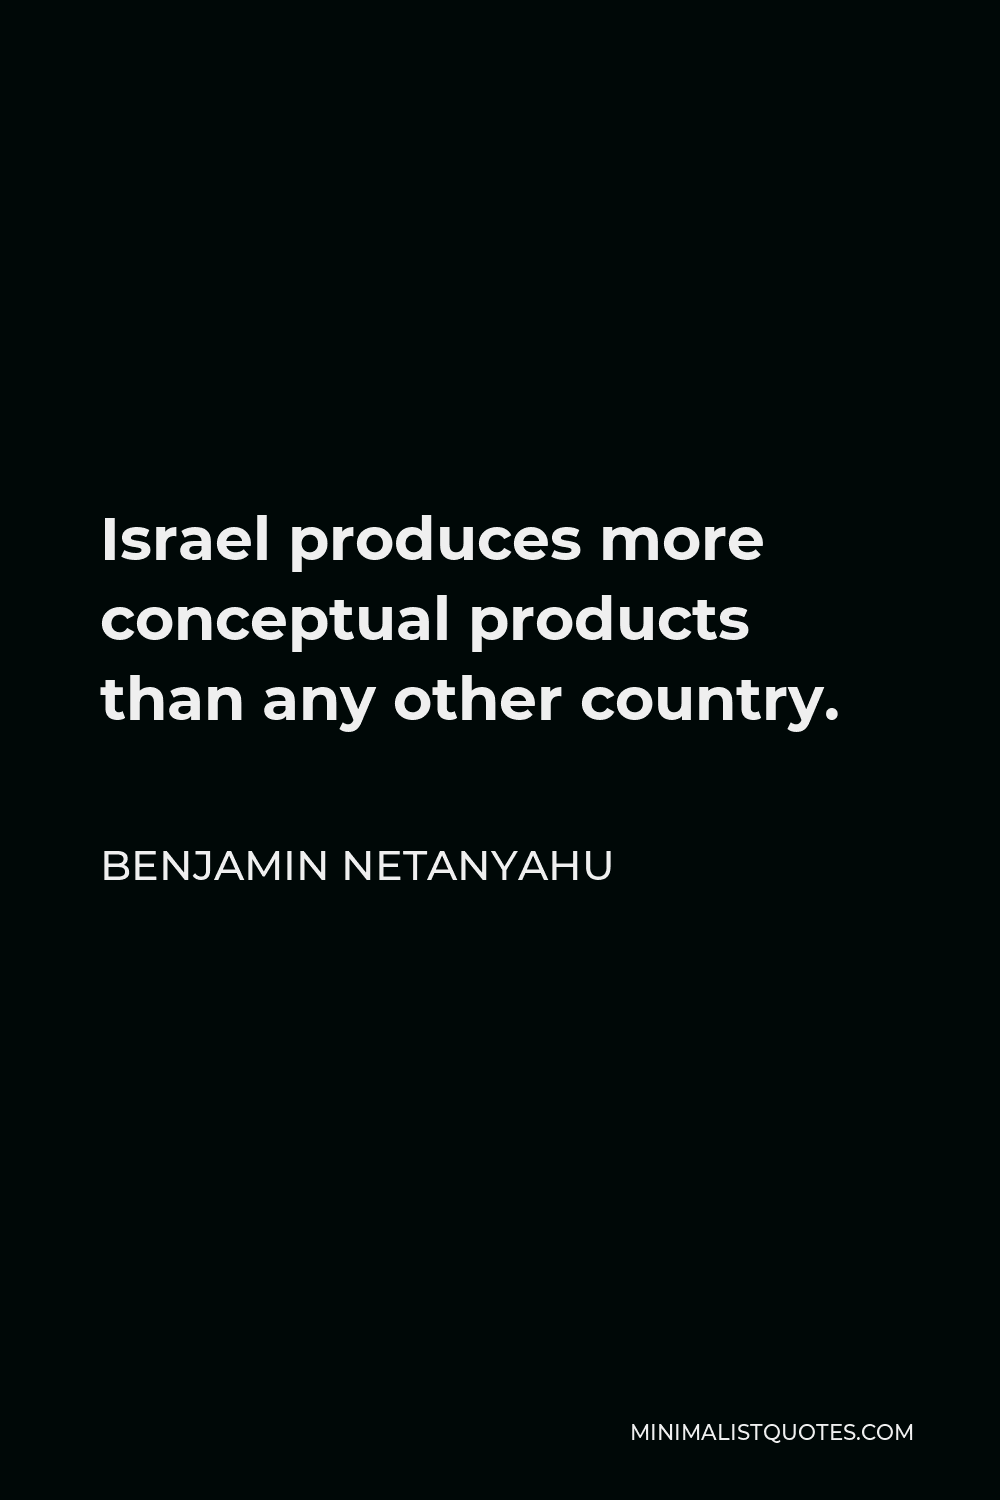 Benjamin Netanyahu Quote - Israel produces more conceptual products than any other country.